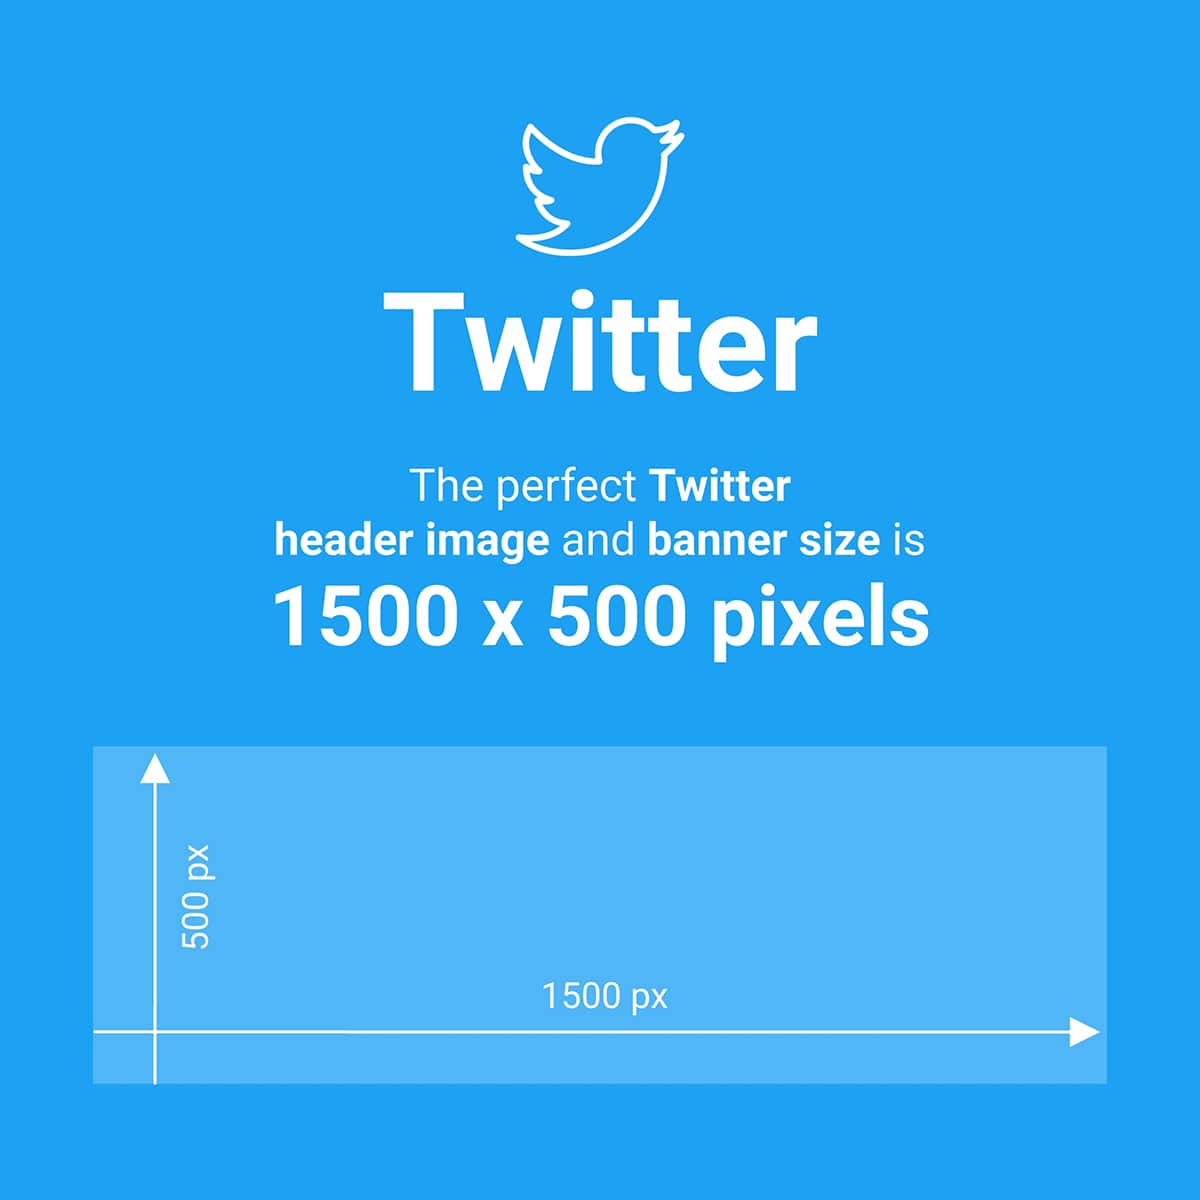 The recommended size for a Twitter header is 1500 x 500 pixels